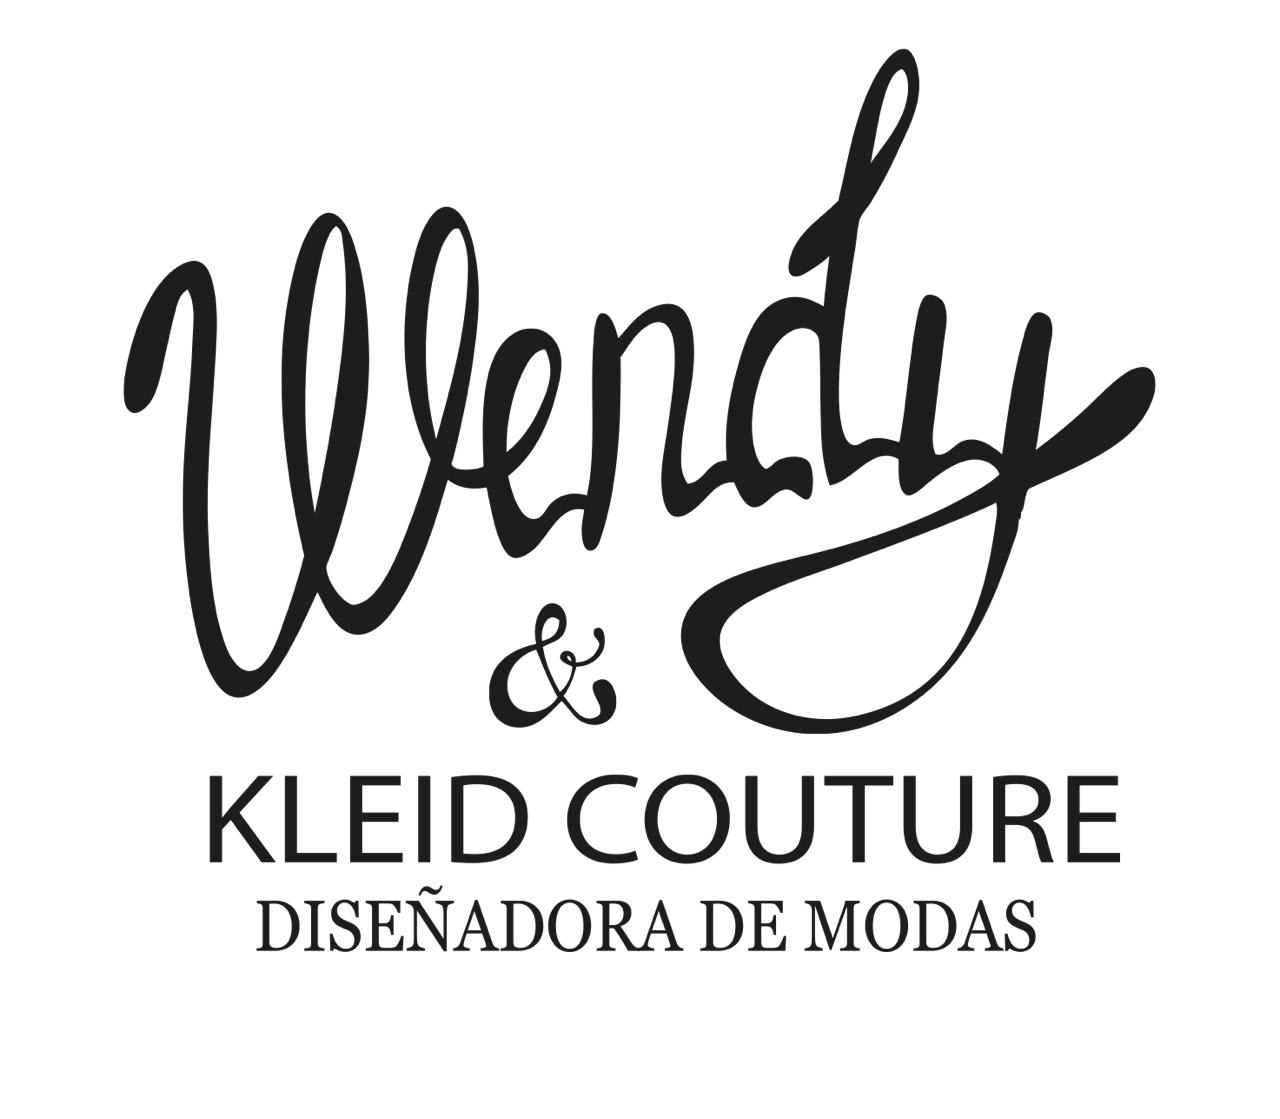 Wendy & Kleid Couture